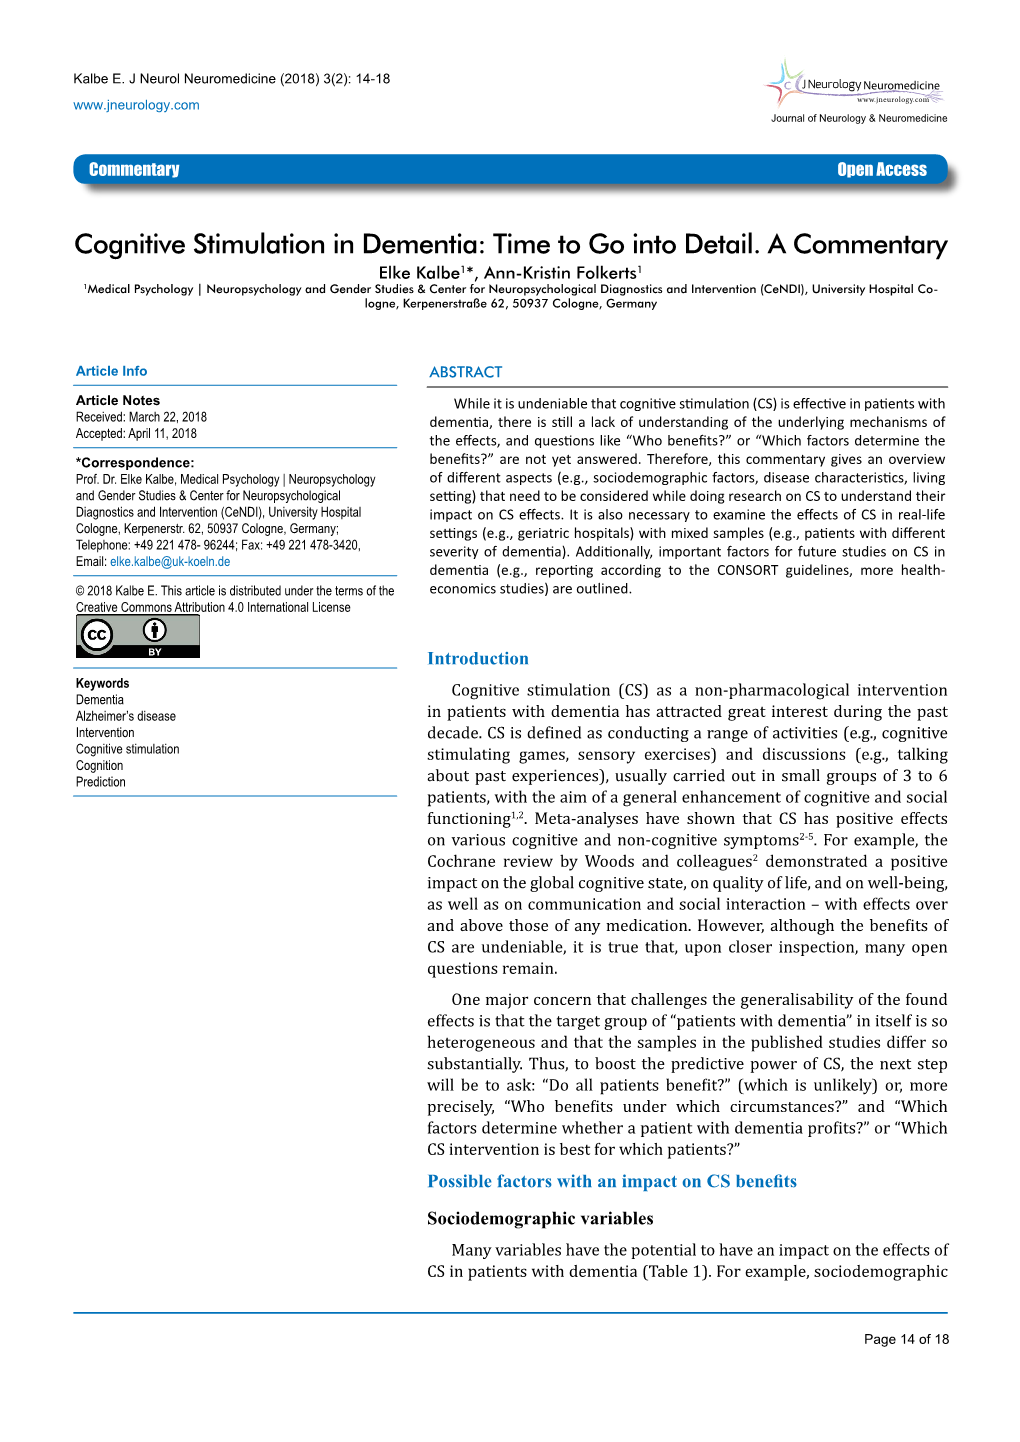 Cognitive Stimulation in Dementia: Time to Go Into Detail